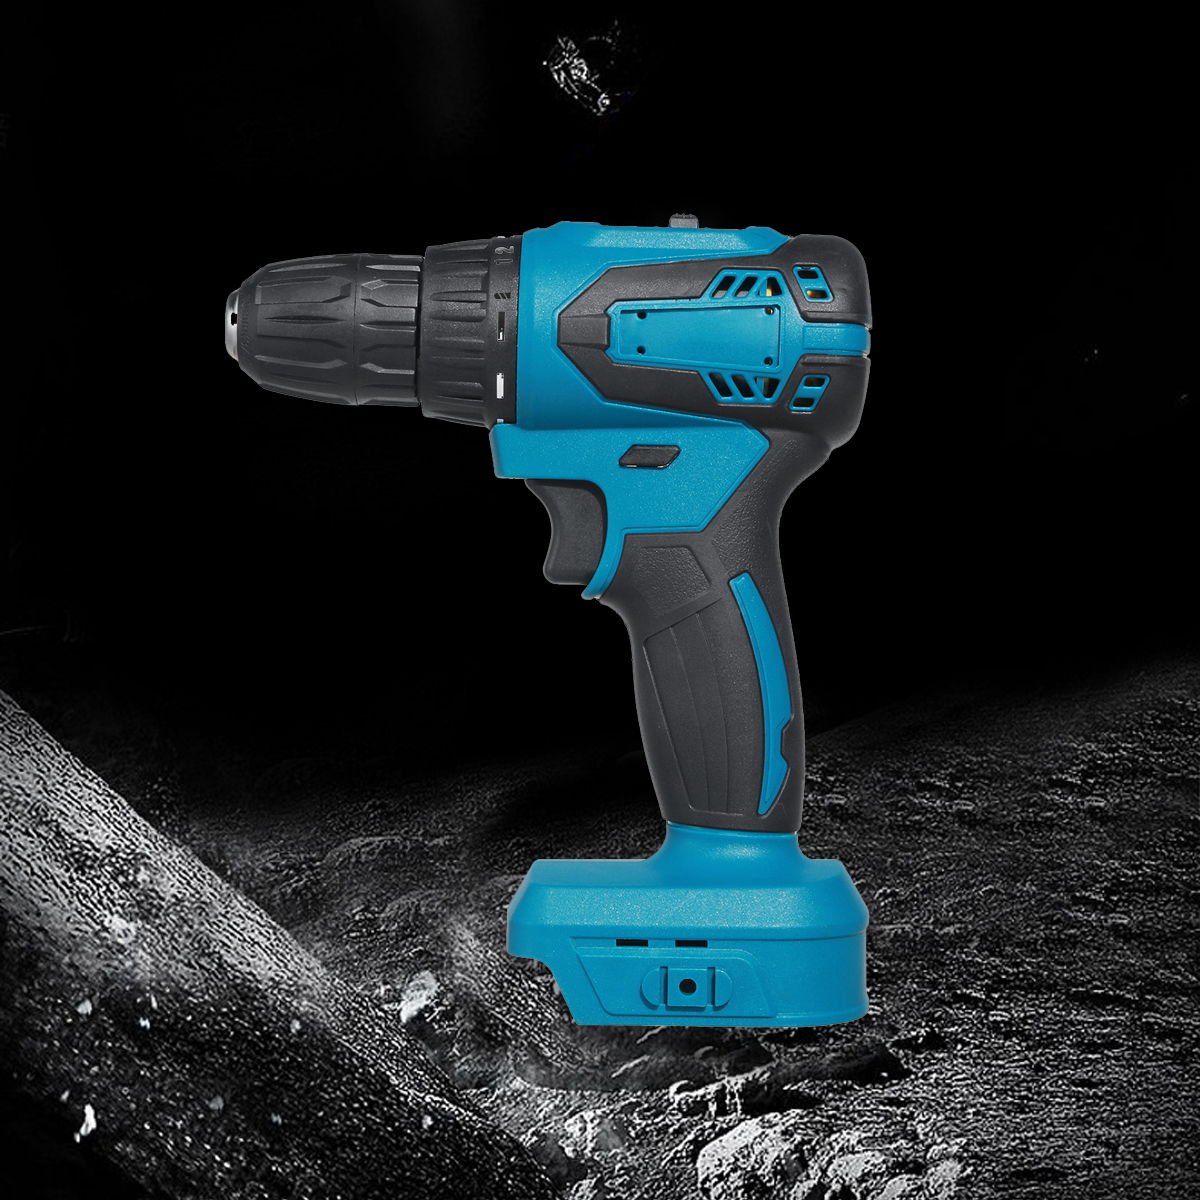 10mm-Rechargable-Electric-Drill-Screwdriver-1350RPM-2-Speed-Impact-Hand-Drill-Fit-Makita-Battery-1882944-14